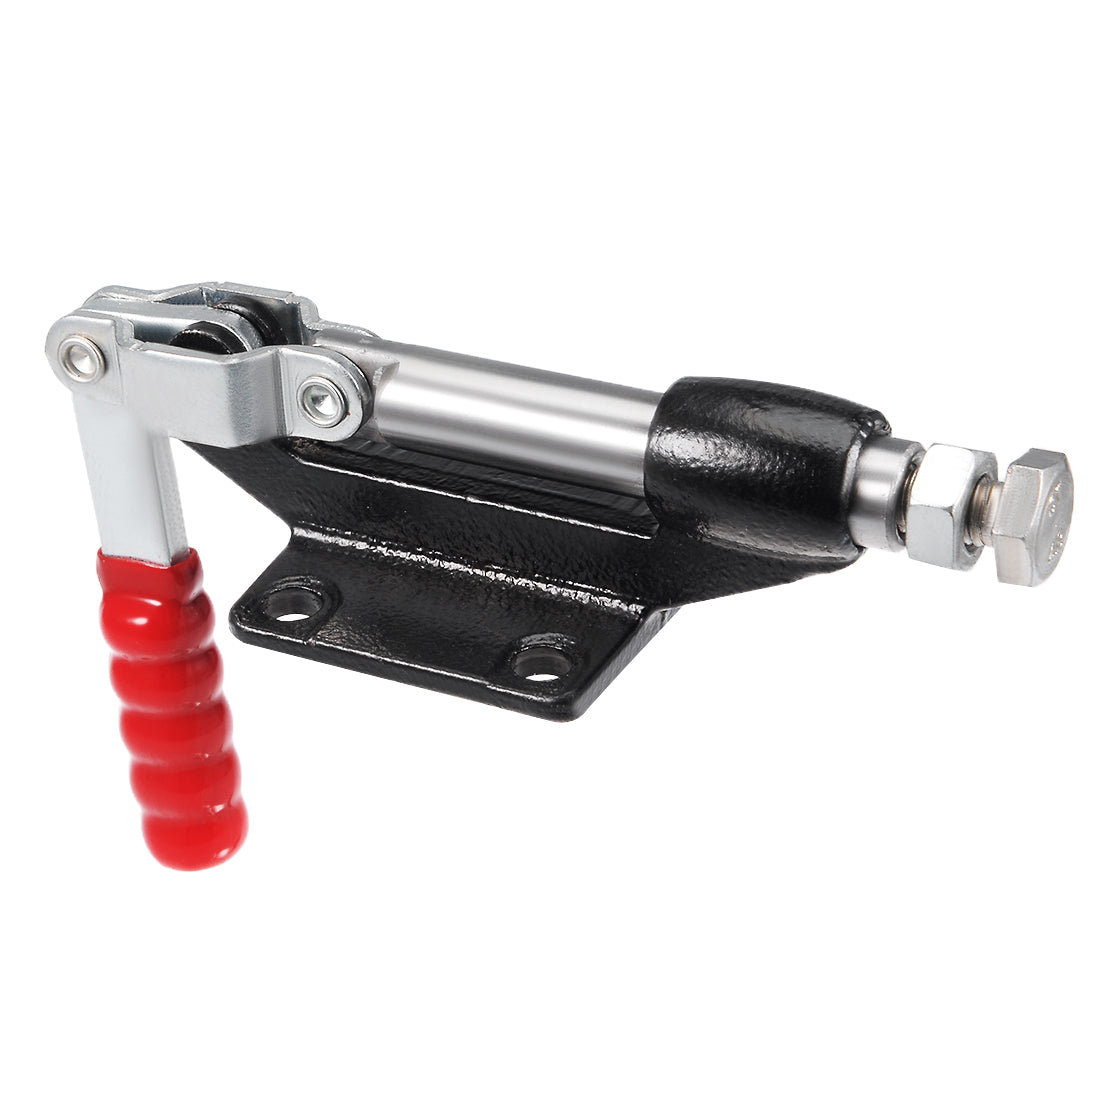 uxcell Uxcell Toggle Clamp 390kg 858lbs Holding Capacity 44mm Stroke Push Pull Action Hand Tool BRH-305-EM